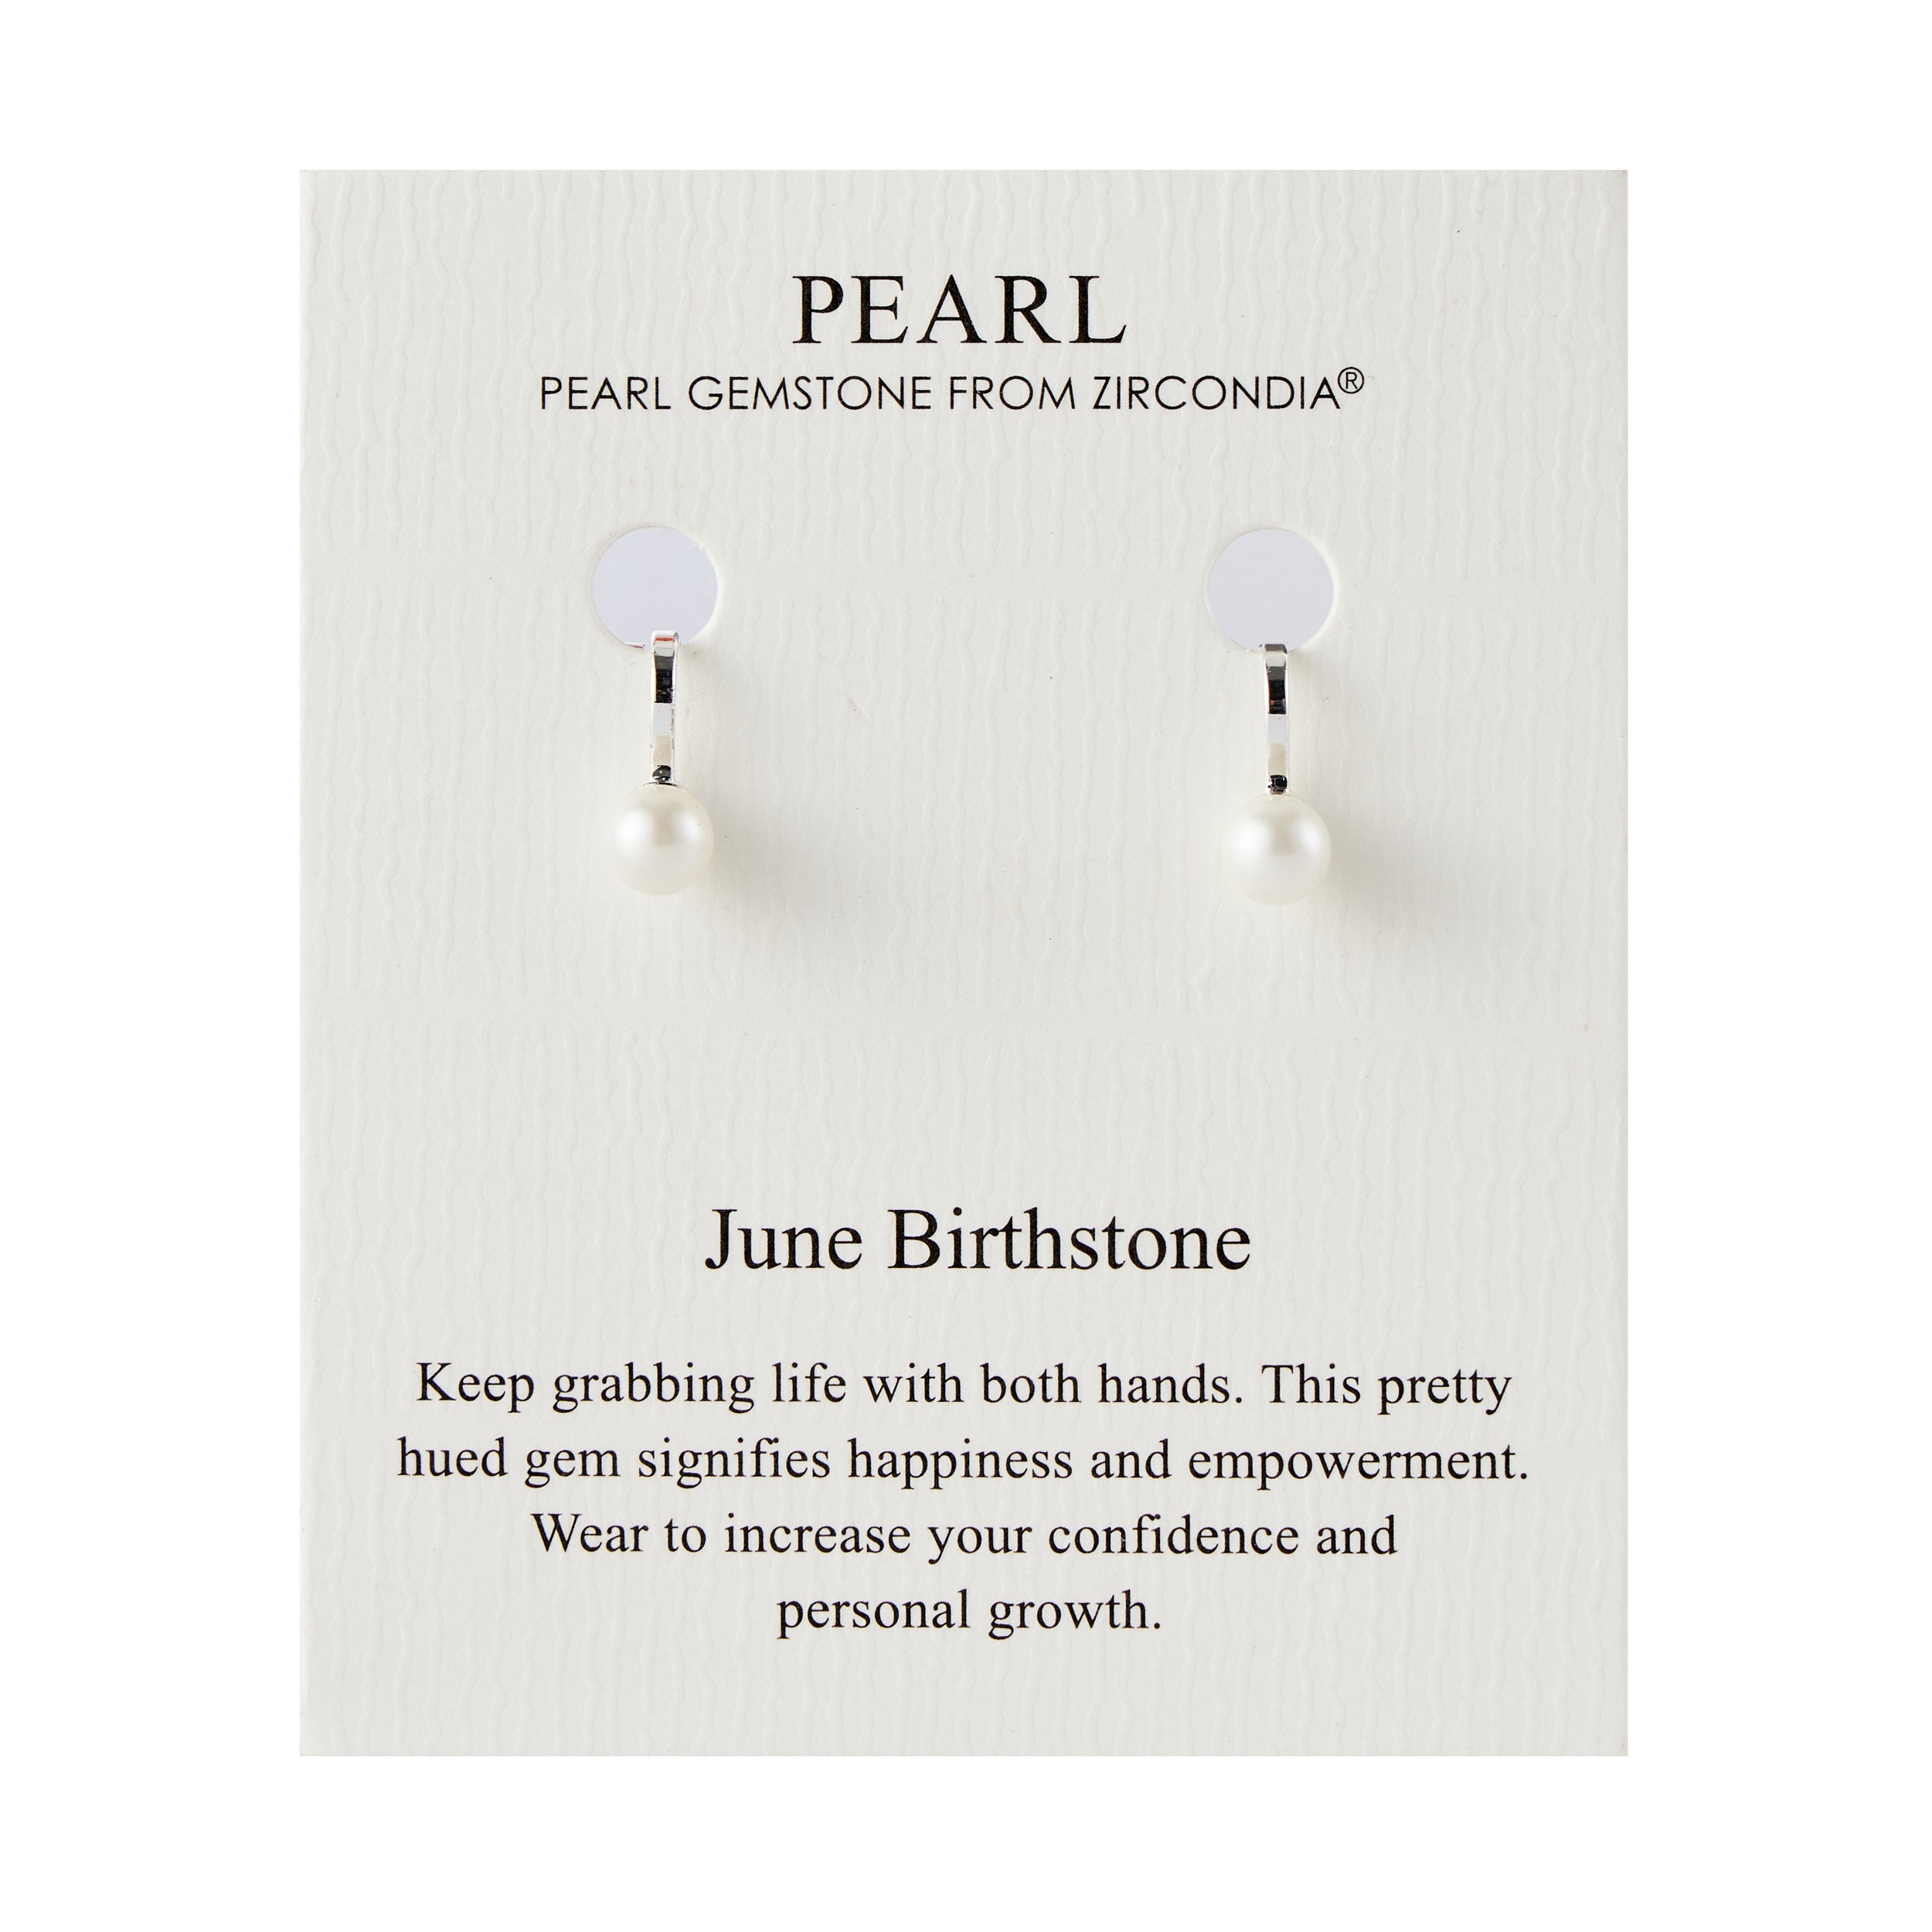 June (Pearl) Birthstone Clip On Earrings Created with Gemstones from Zircondia®